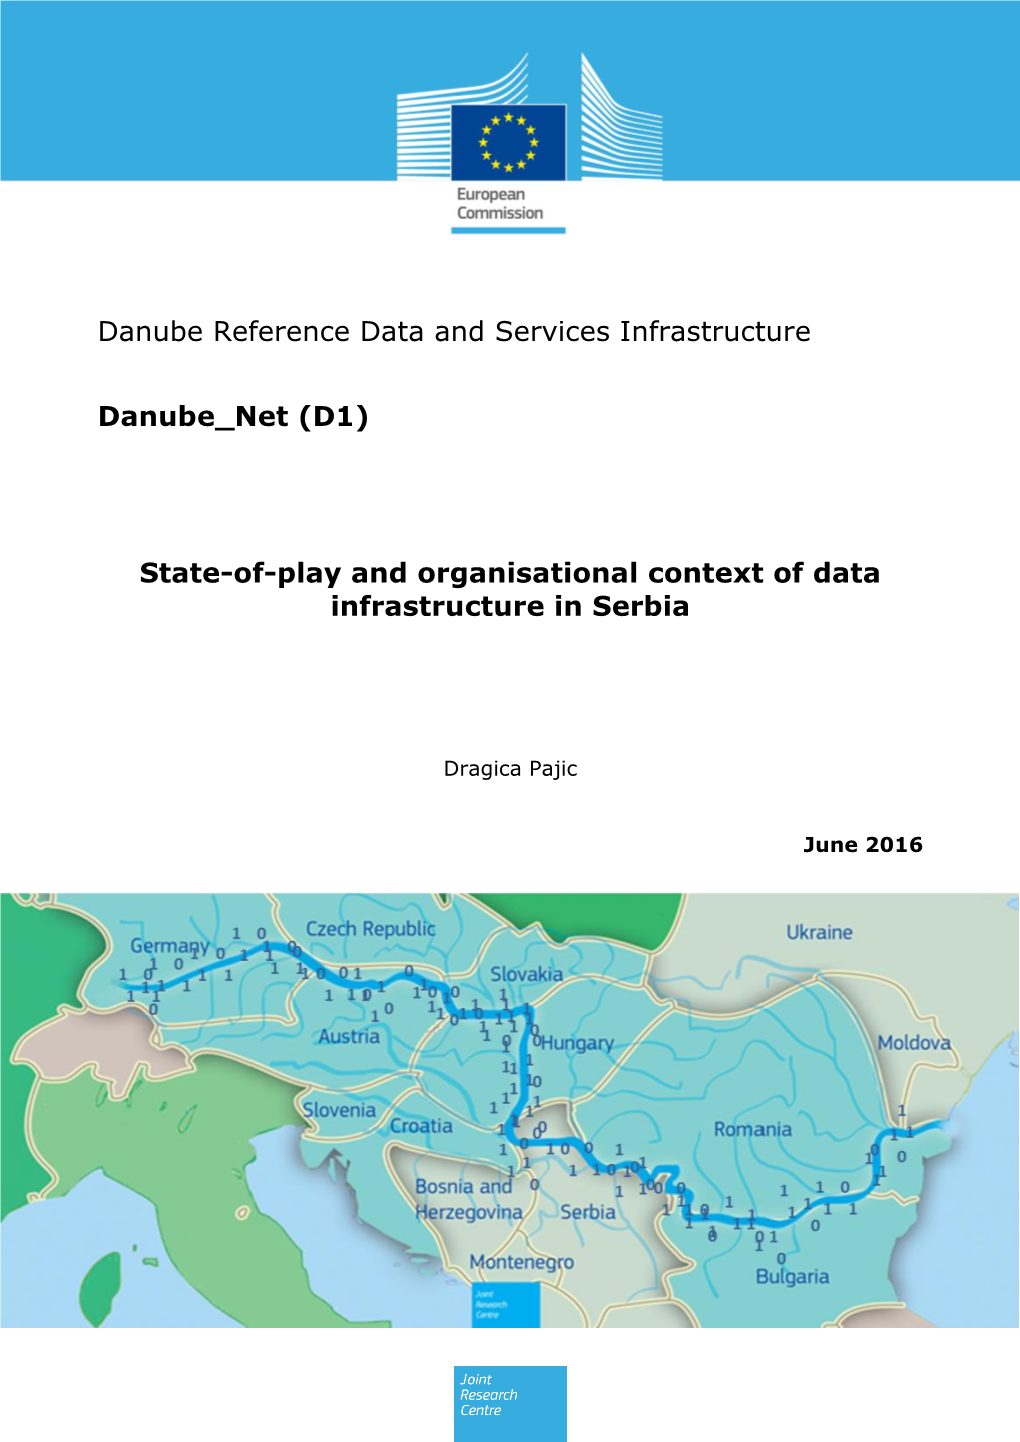 Danube Reference Data and Services Infrastructure